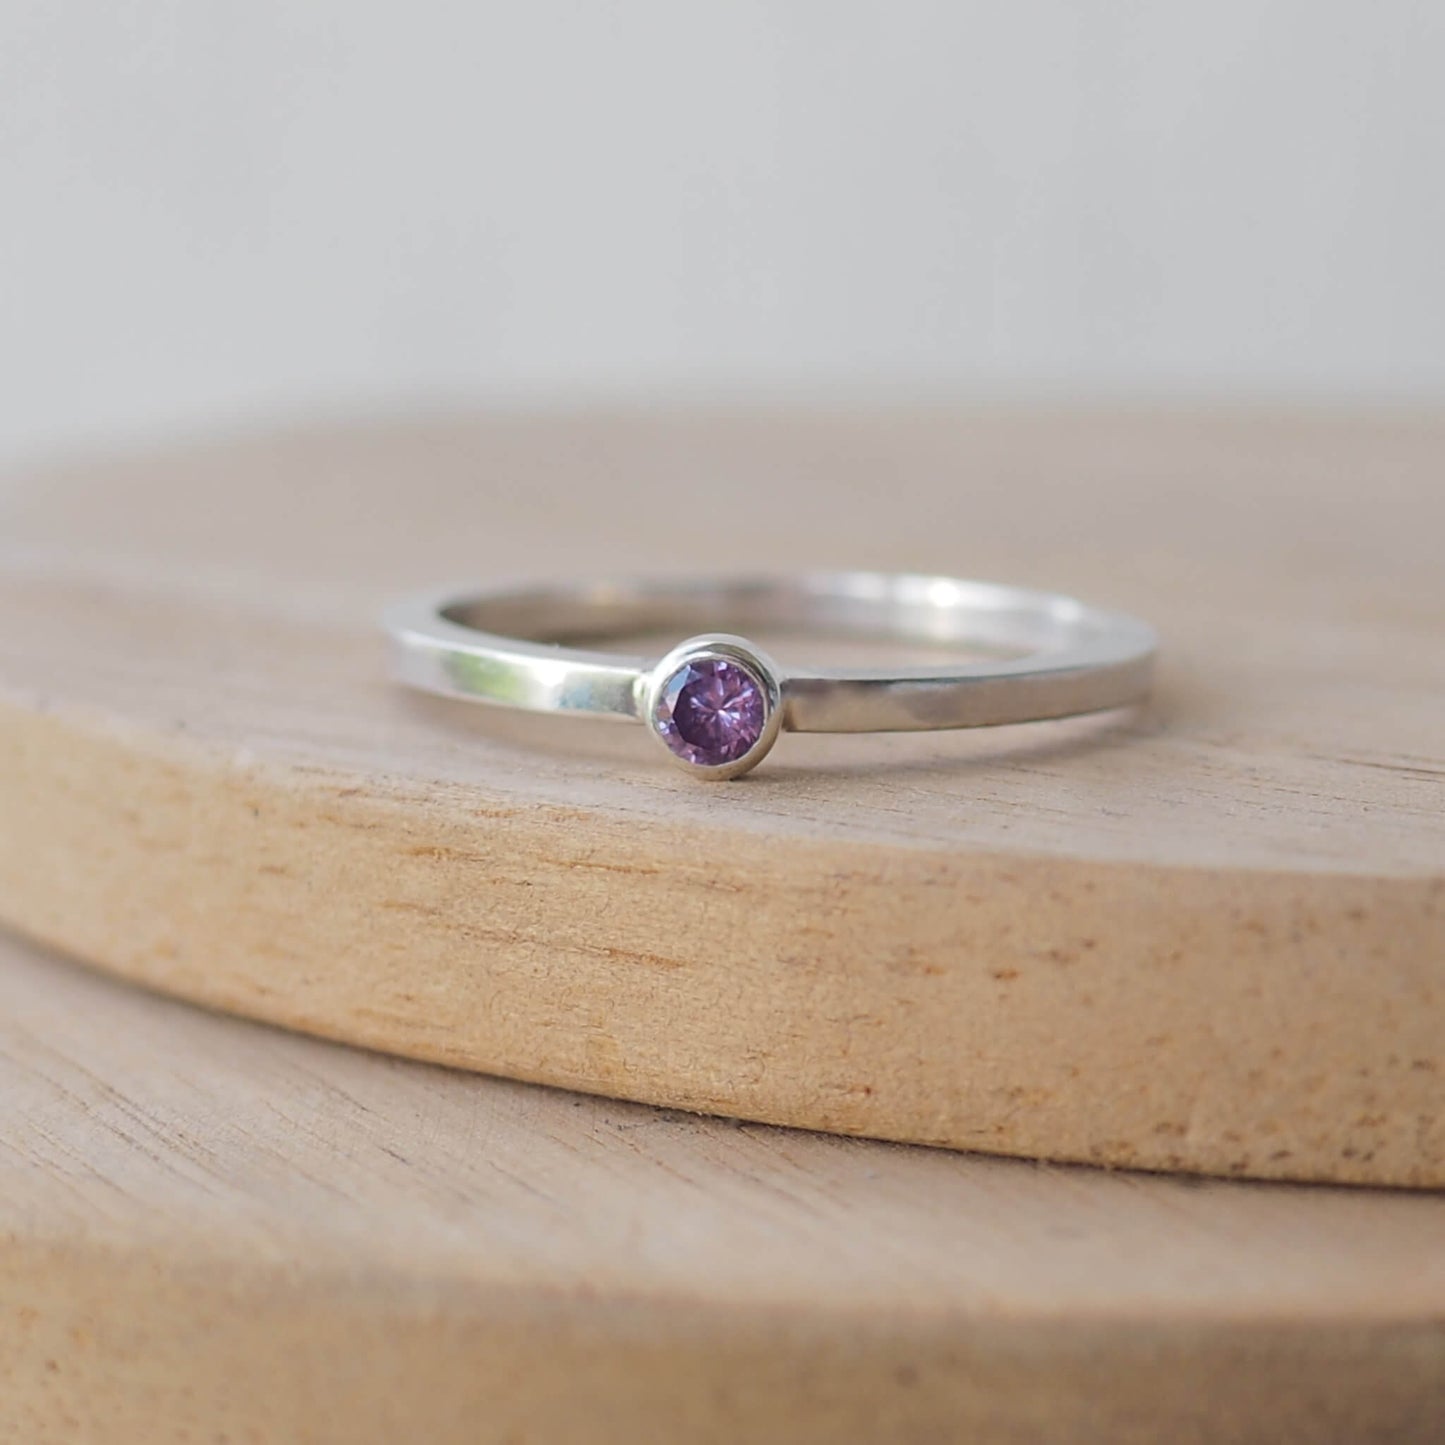 Silver ring with a purple gemstone. The ring is simple in style with no embellishment , with a square wire band 1.5mm thick with a simple purple 3mm round cubic zirconia stone set in an enclosed silver setting. Amethyst is birthstone for February. The ring is Sterling Silver and made to your ring size. Handmade in Scotland by Maram Jewellery